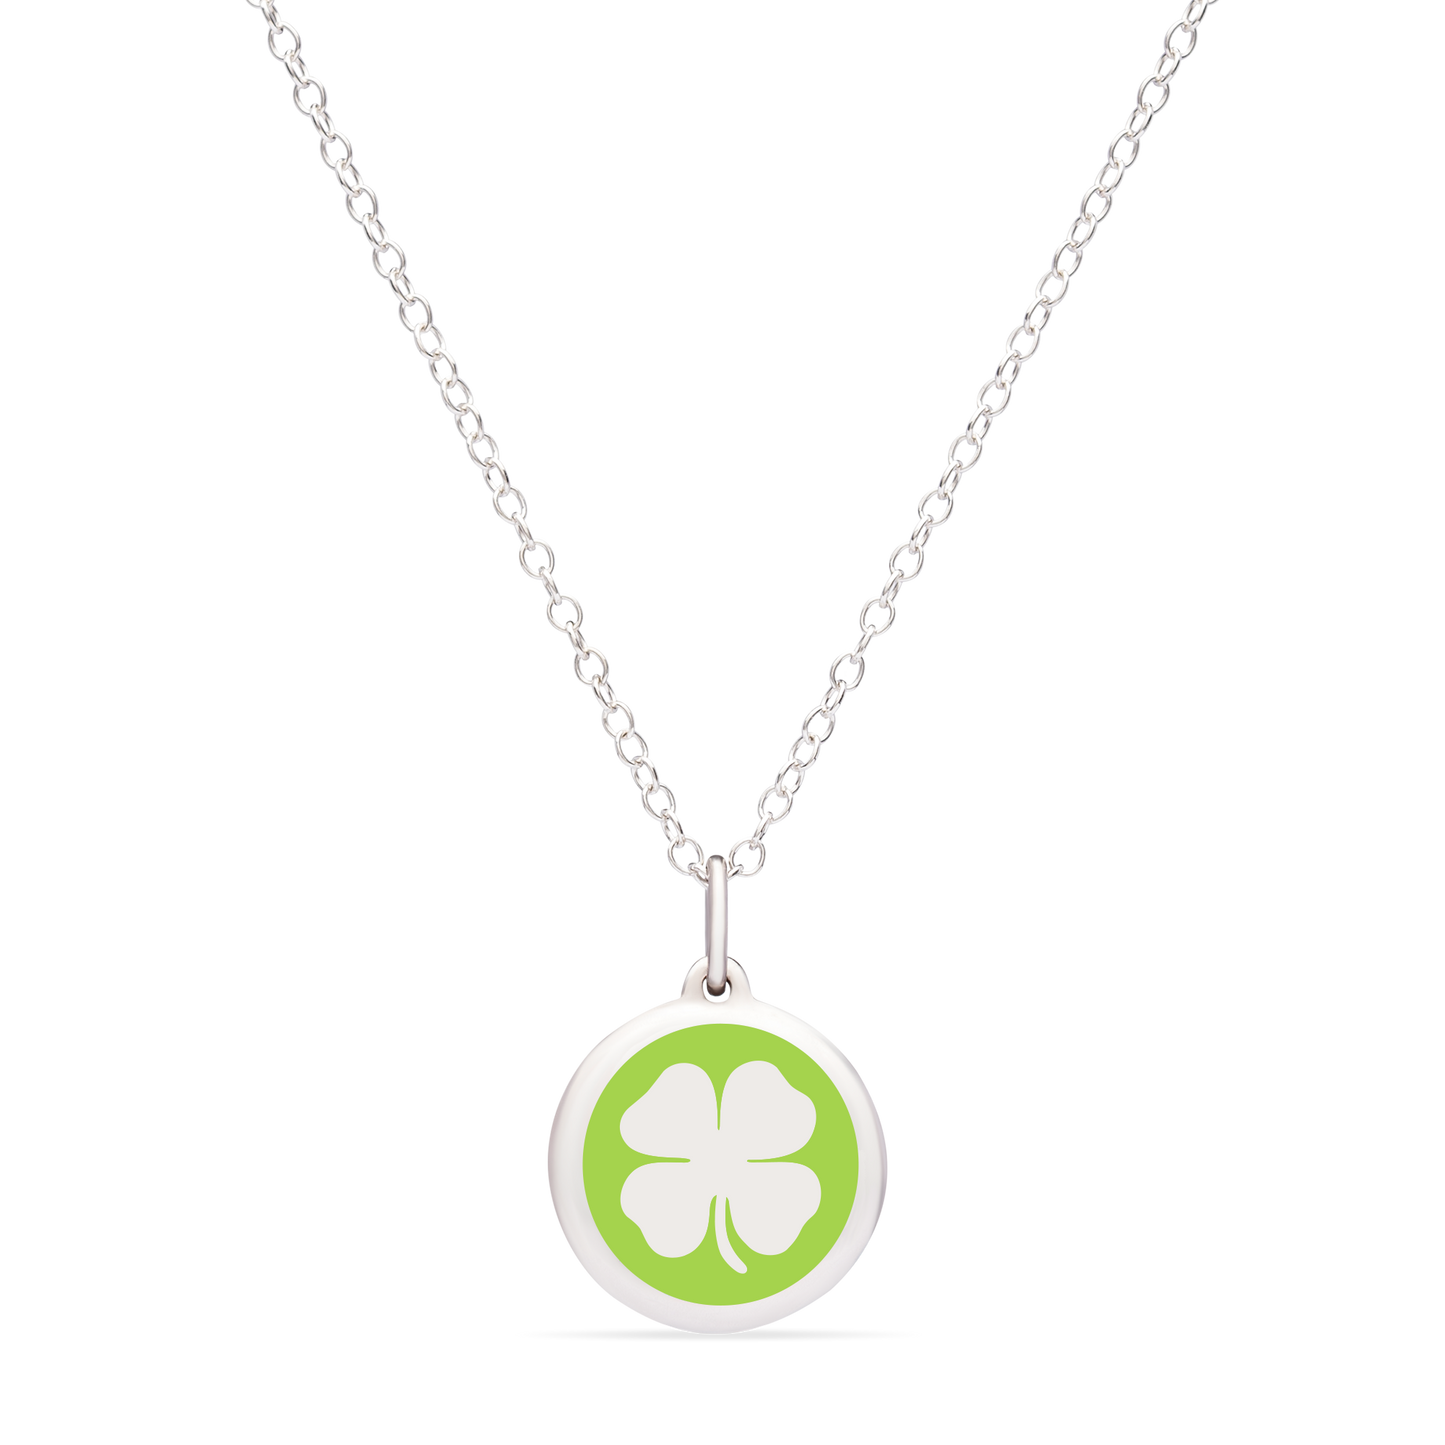 MINI CLOVER CHARM sterling silver with rhodium plate